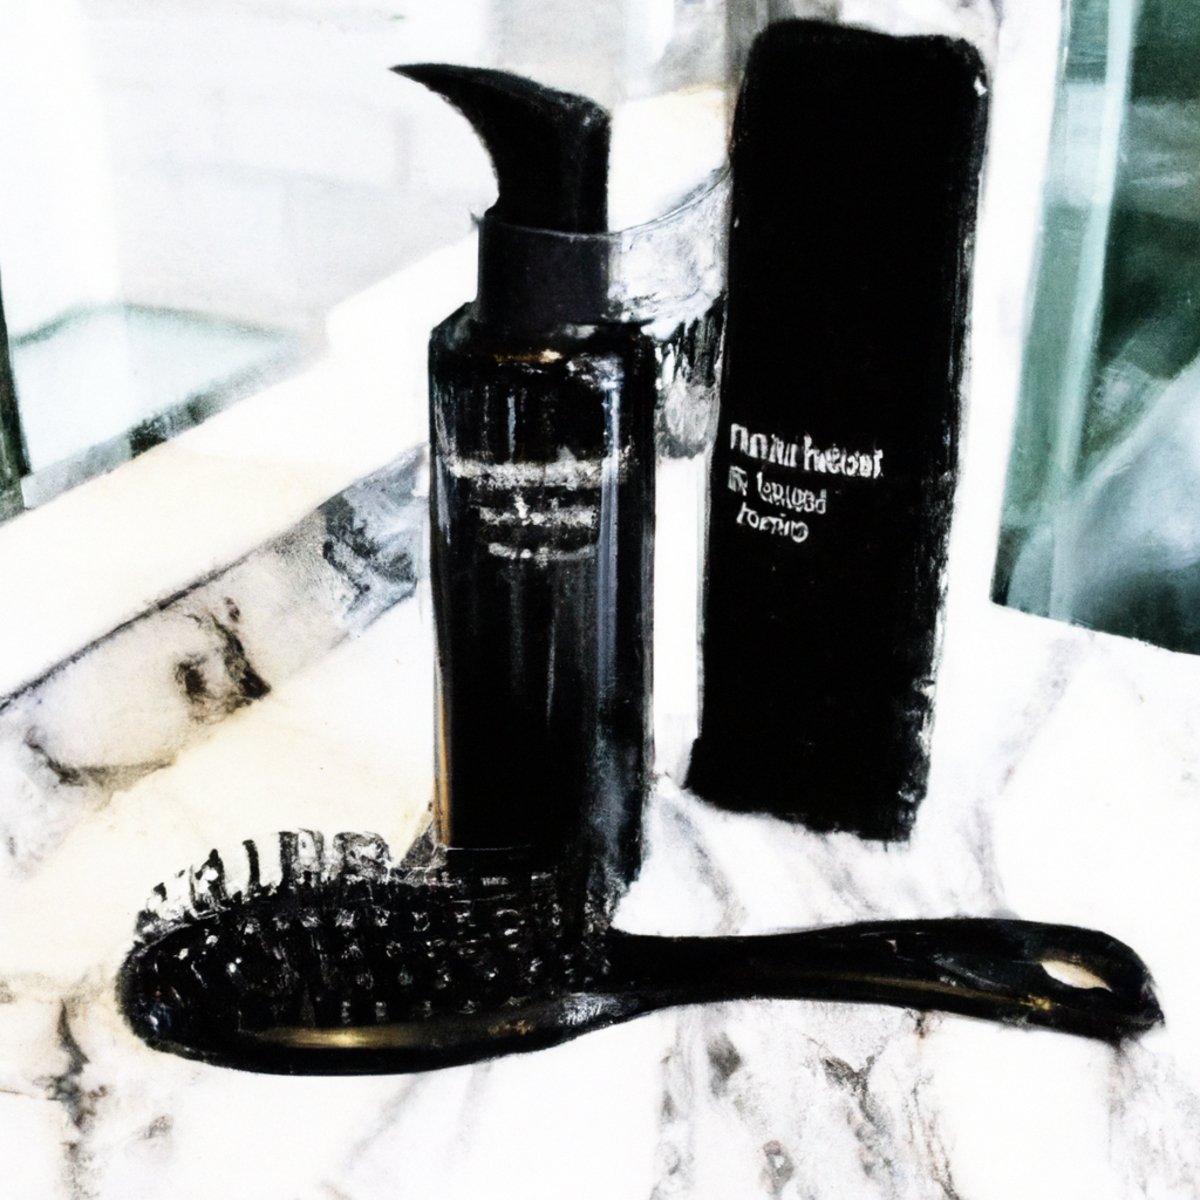 Luxury hair care essentials on a marble countertop.